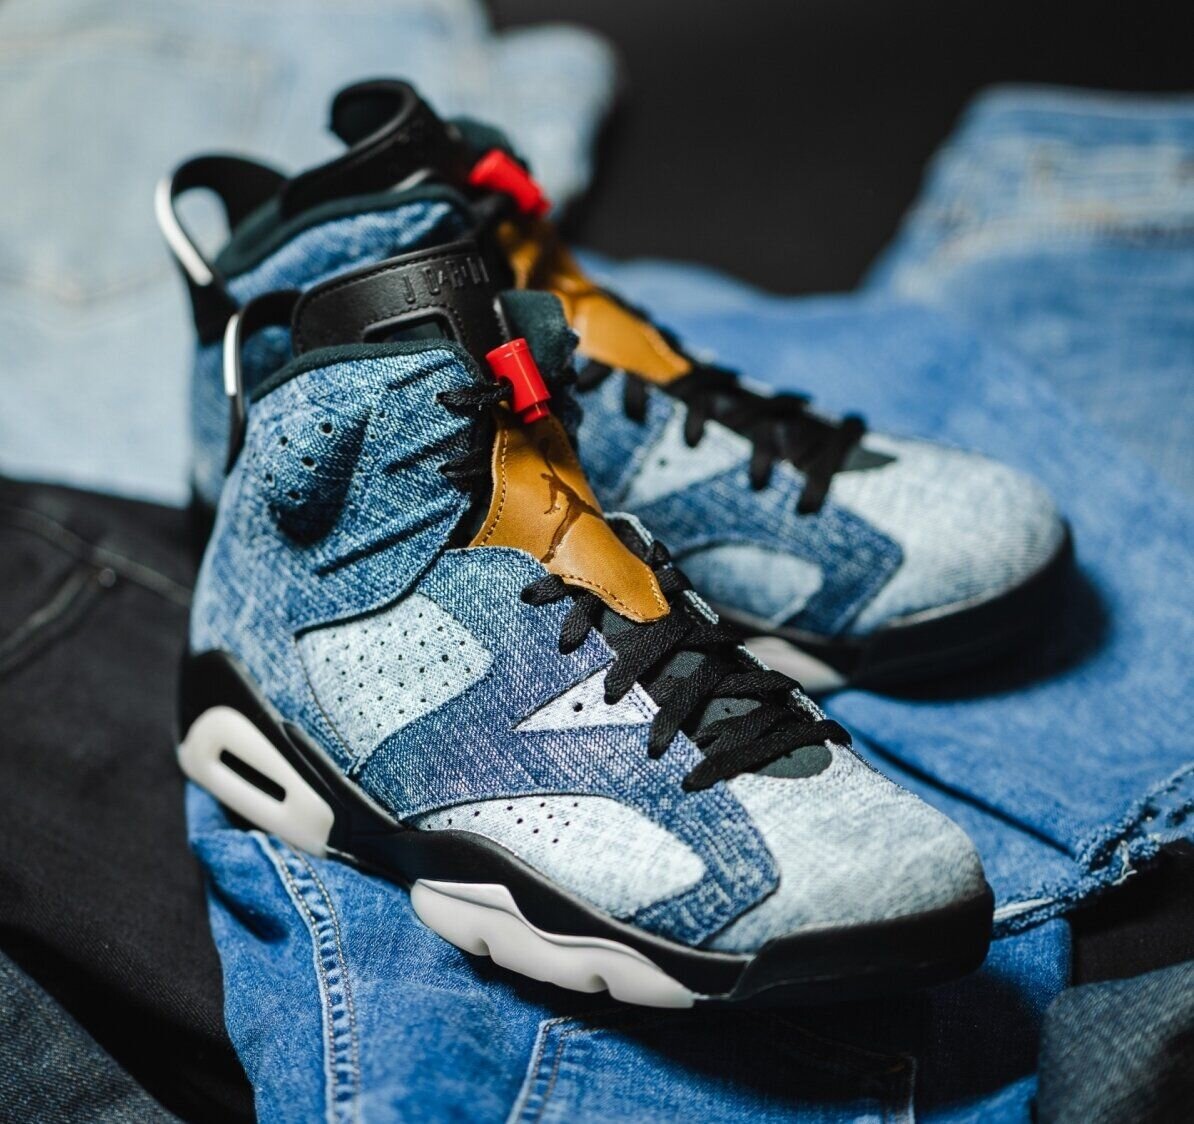 The Air Jordan Retro "Washed Denim" Is For $127.99! — Kicks Under Cost